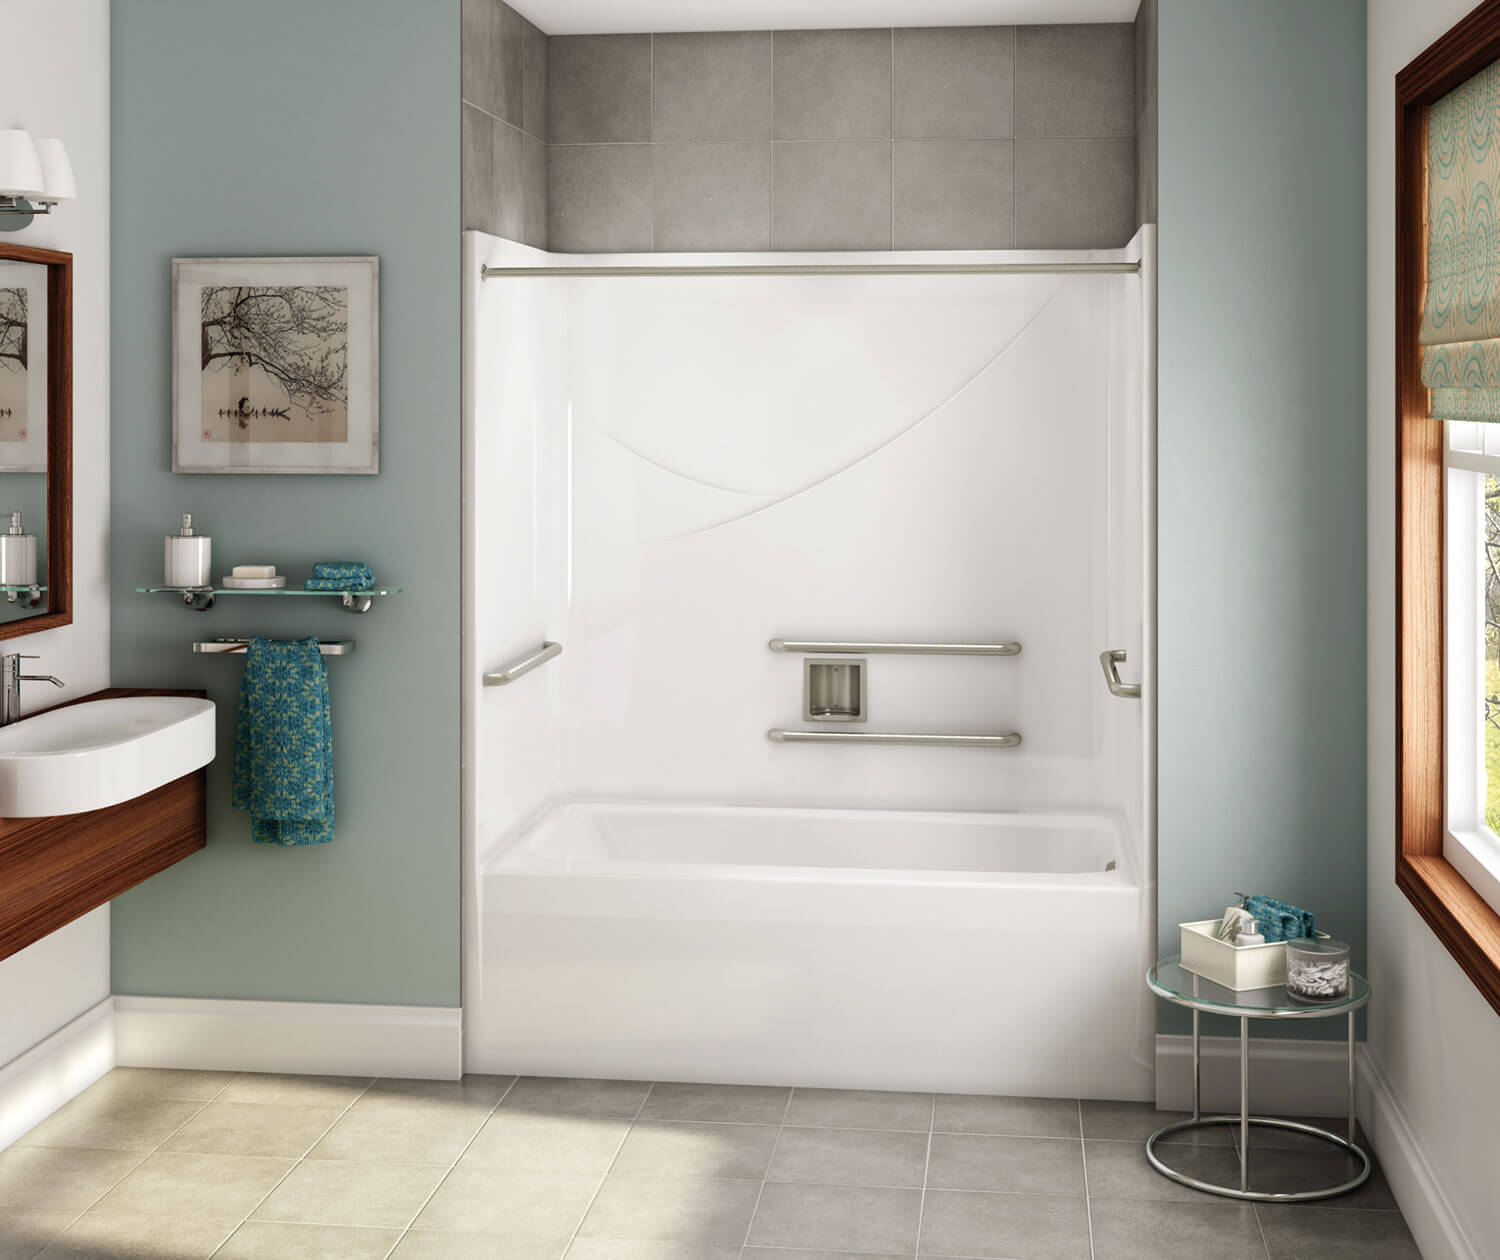 Opts 6032 Acrylx Alcove Left Hand Drain One Piece Tub Shower In White